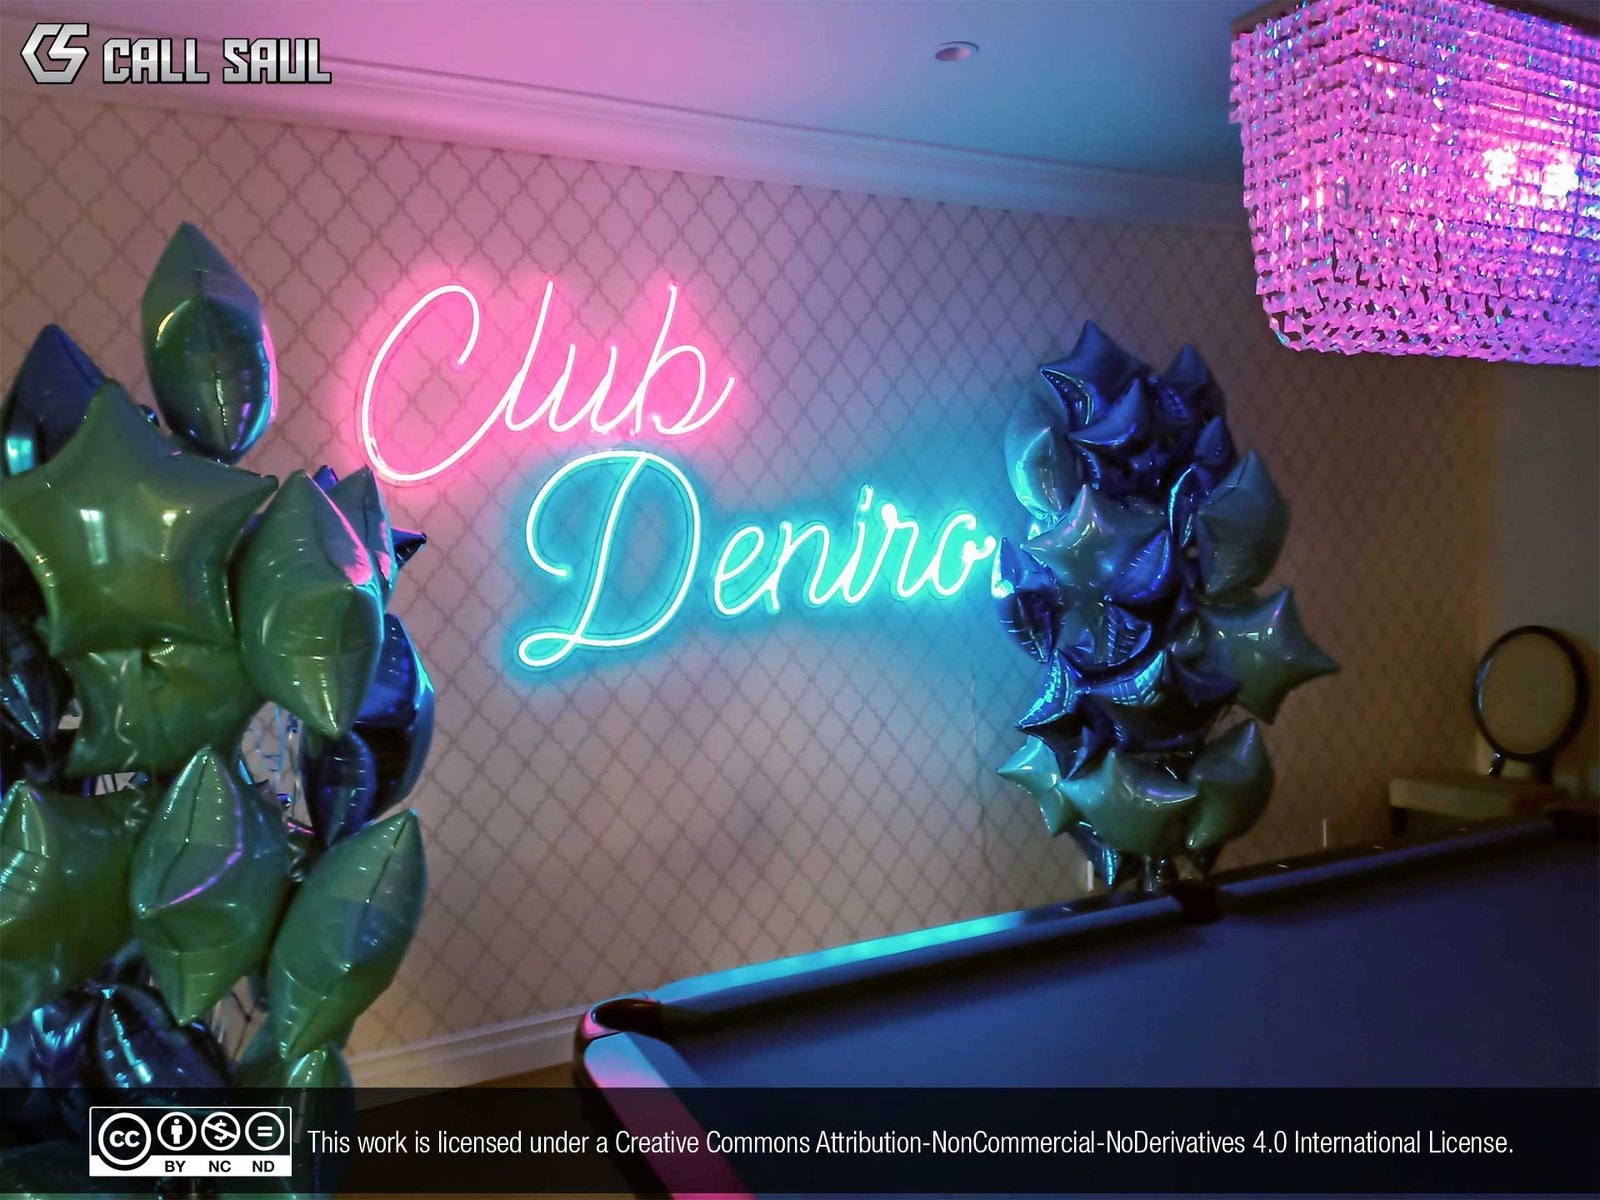 Club Deniro Pink and Blue Color LED Neon Sign